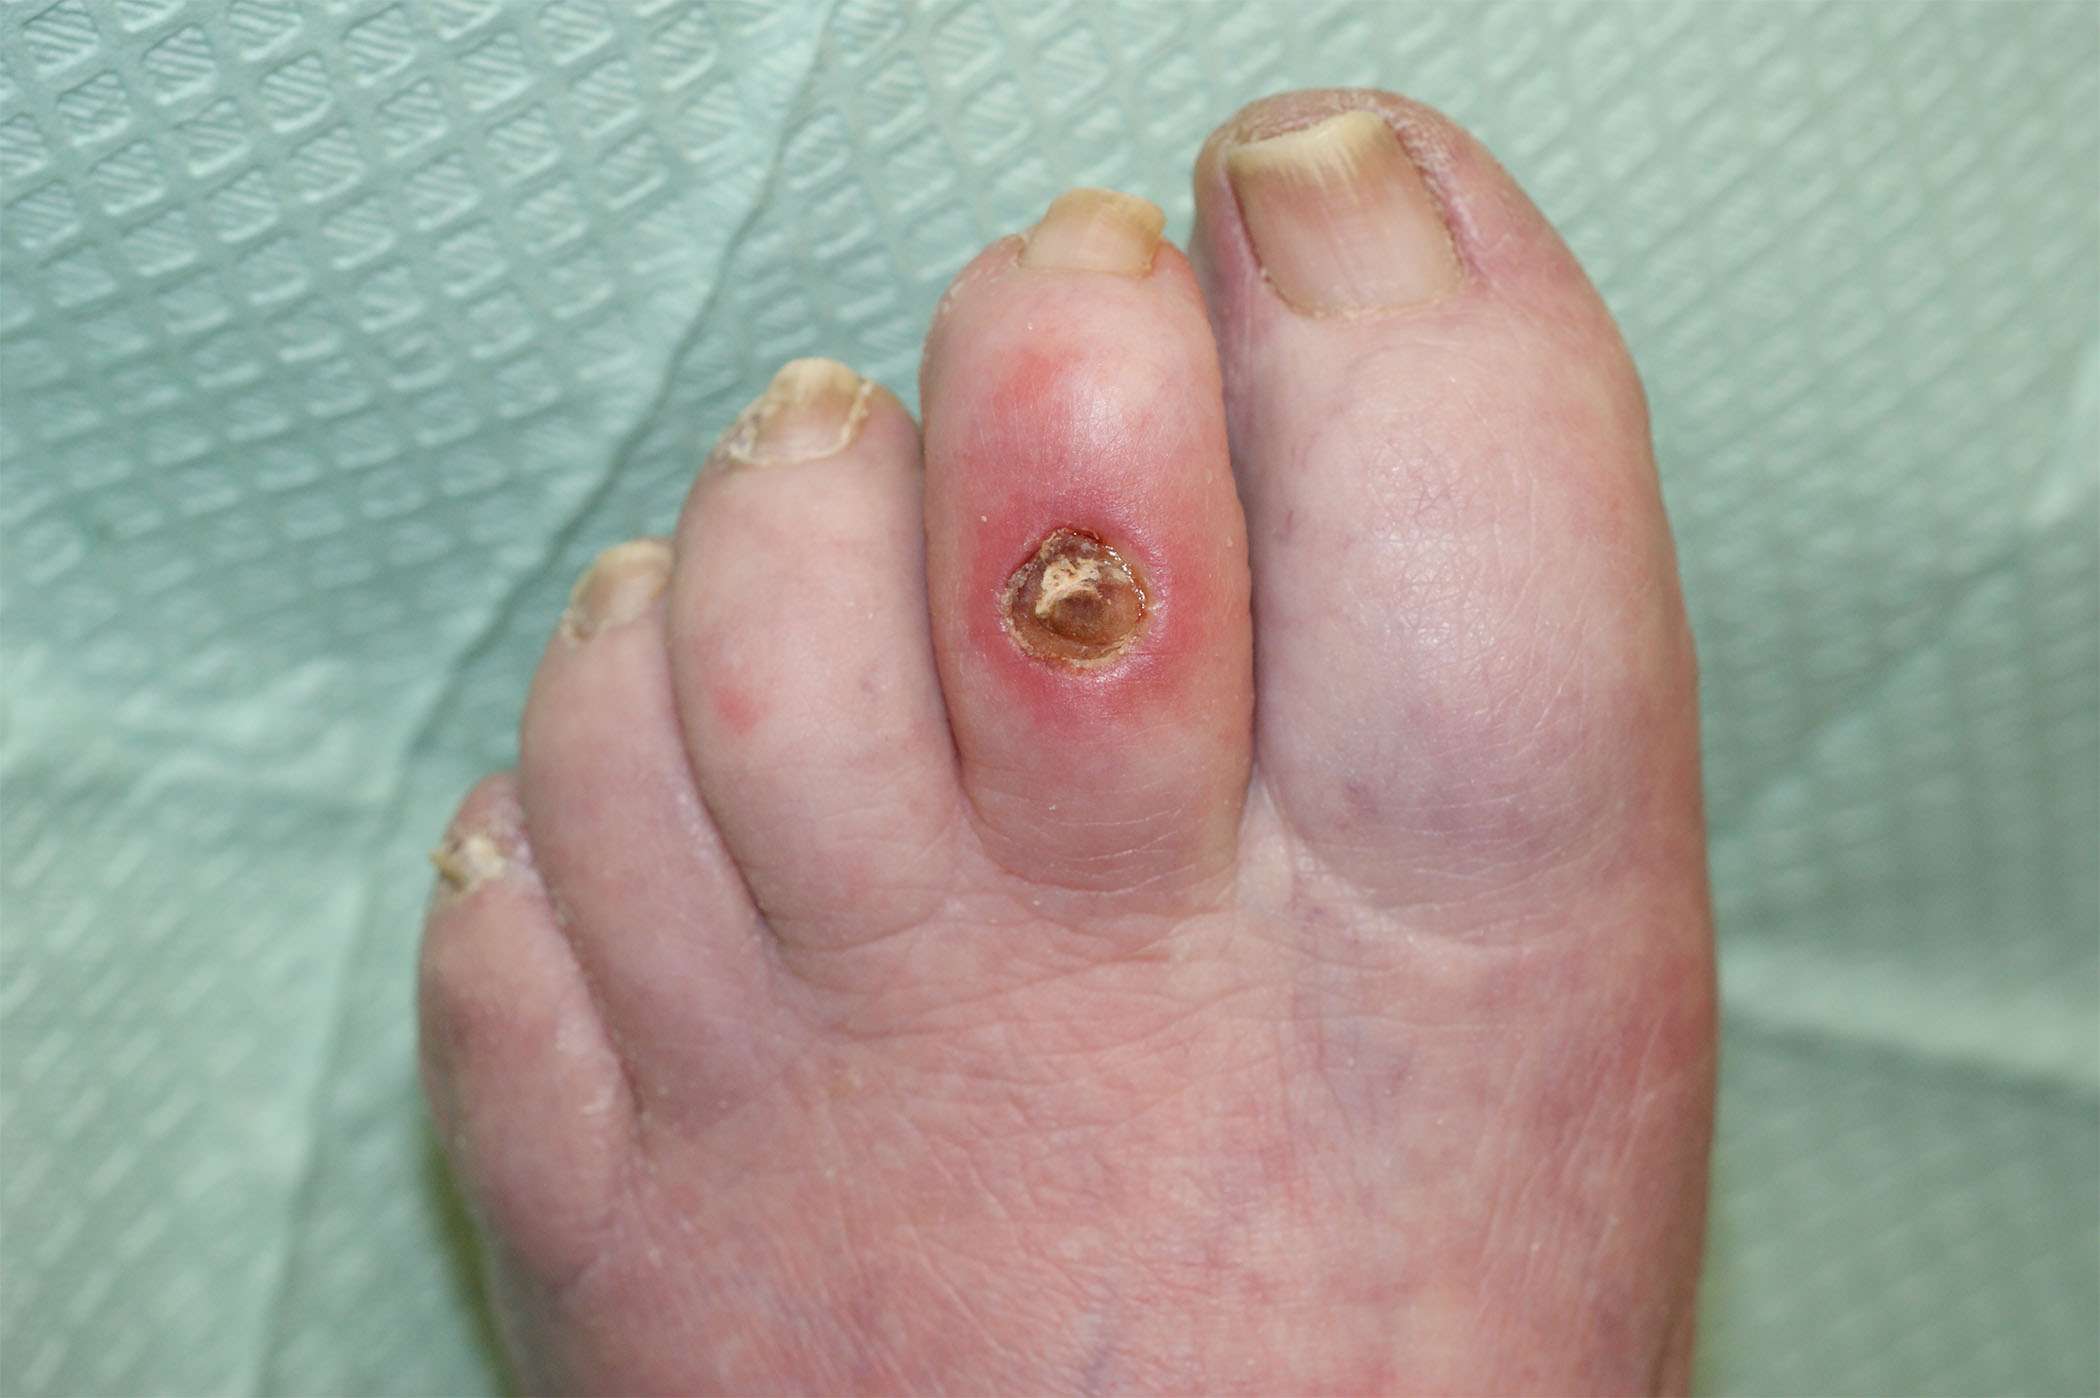 Evaluation of Peripheral Neuropathy in the Diabetic Foot